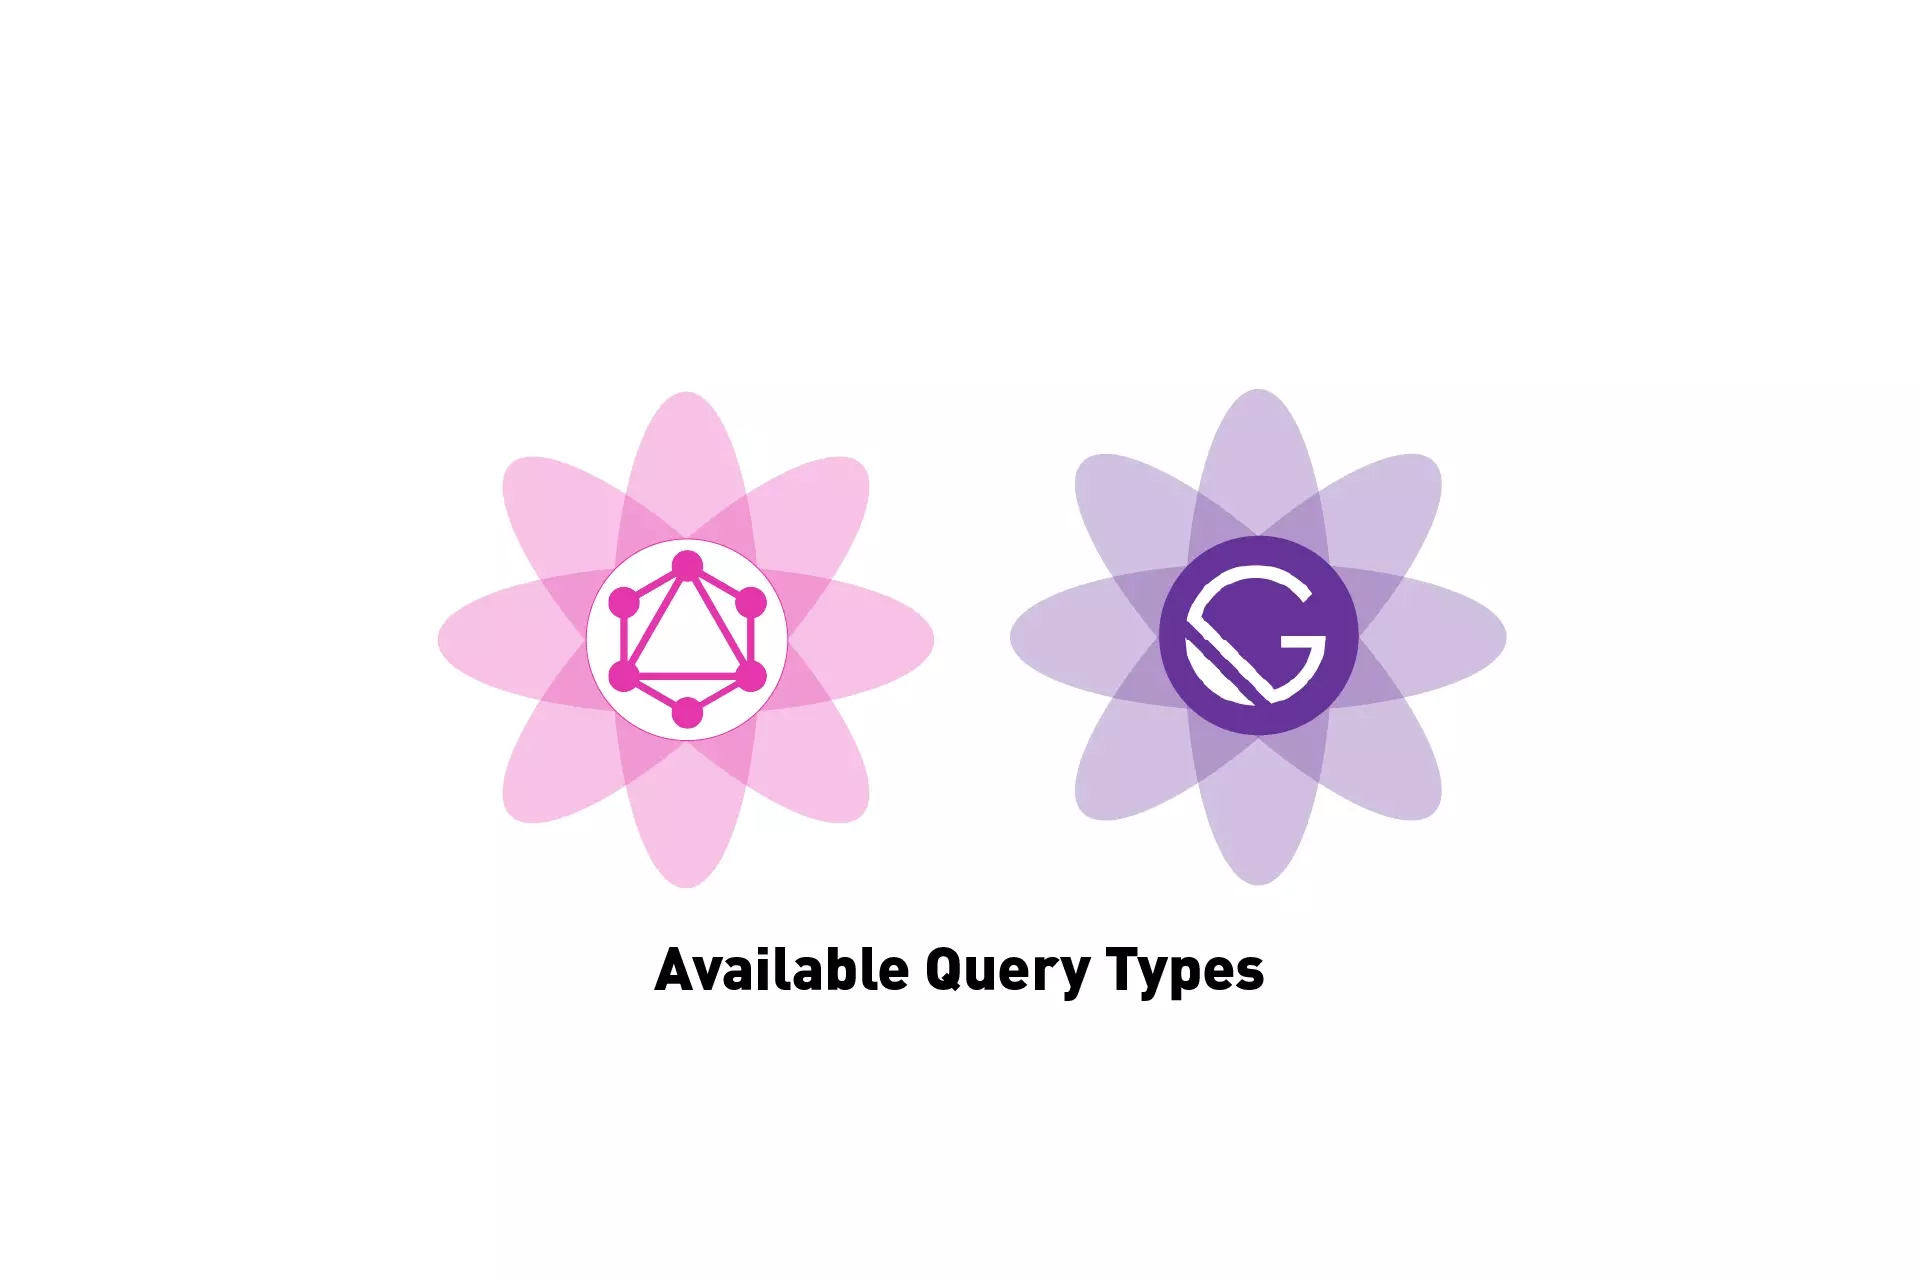 A flower that represents the GraphQL next to one that represents GatsbyJS. Beneath them sits the text "Available Query Types".